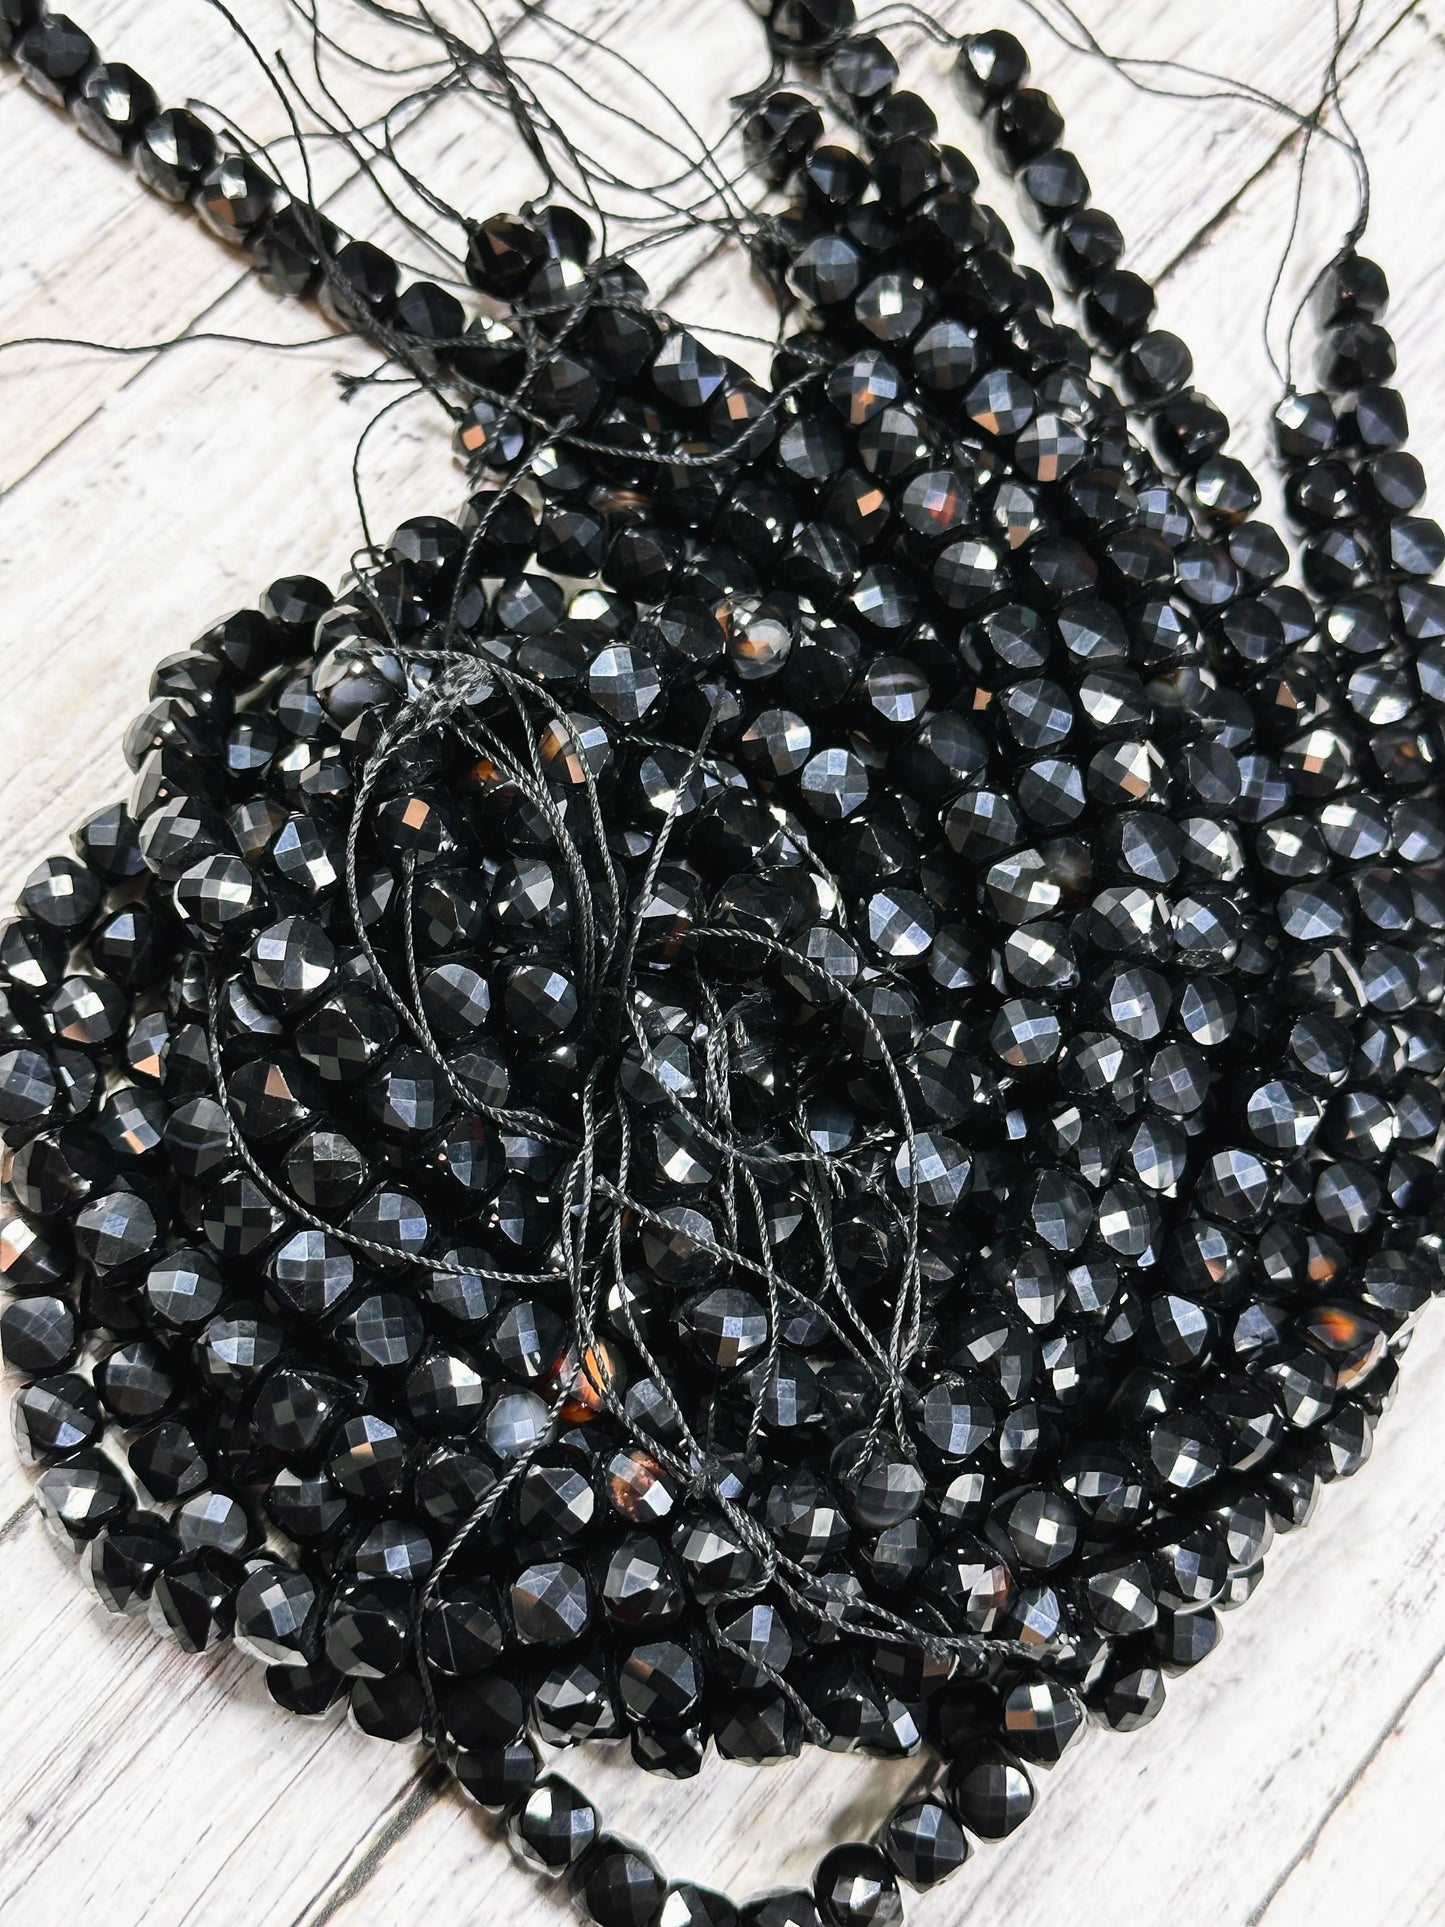 AAA Black Tourmaline Gemstone Bead Faceted 8mm Cube Shape, Gorgeous Natural Black Color Tourmaline Stone Bead Great Quality Full Strand 15.5